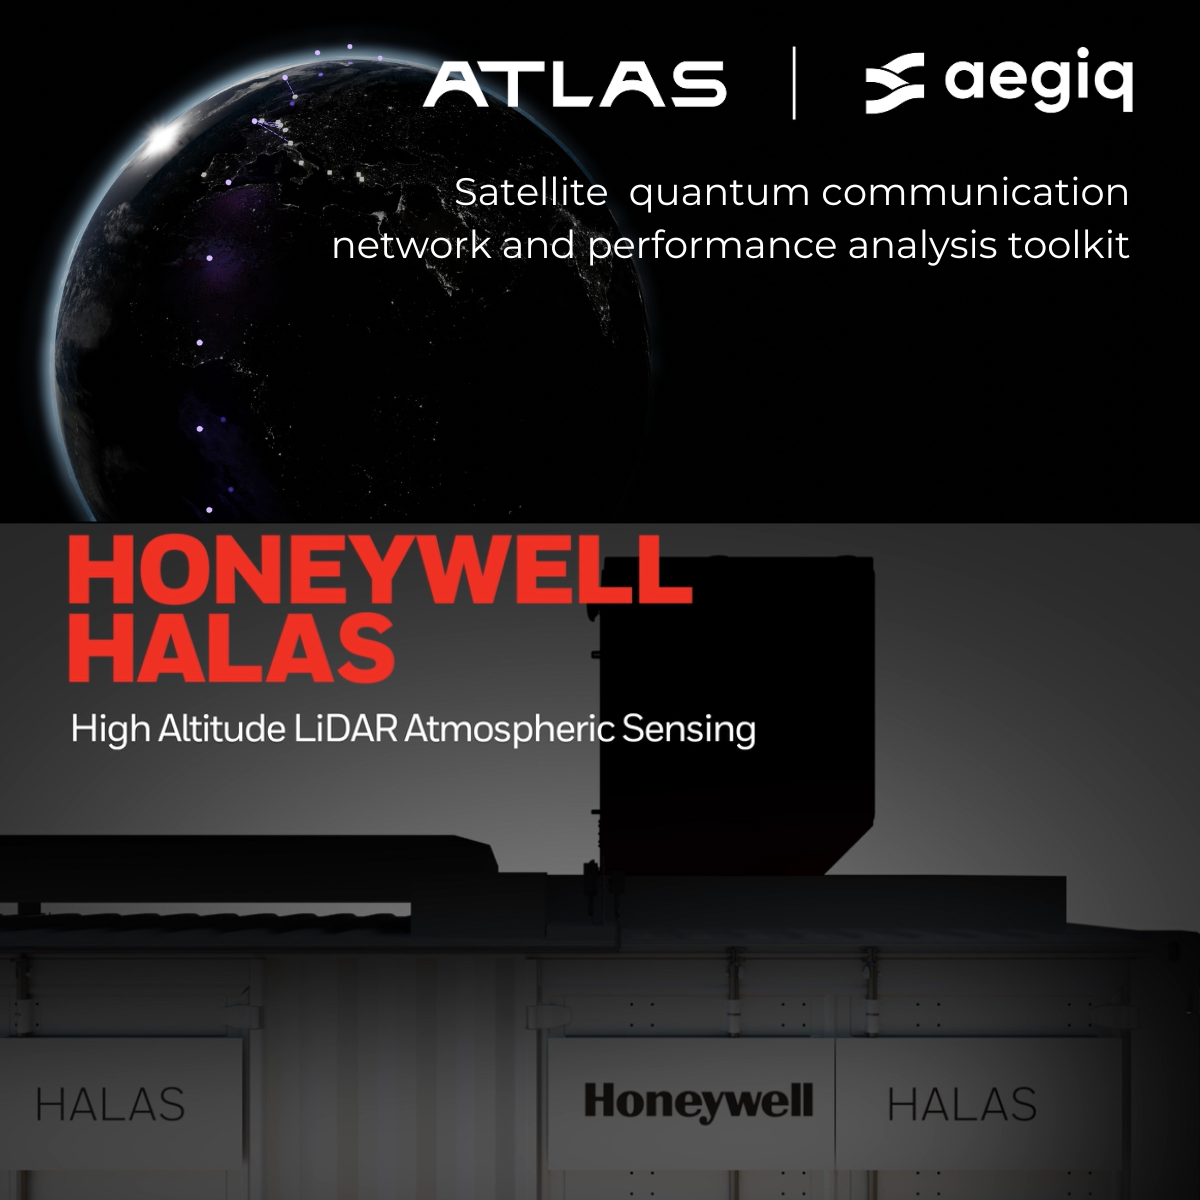 Honeywell and Aegiq to Collaborate on Innovative Technology for Small Satellites